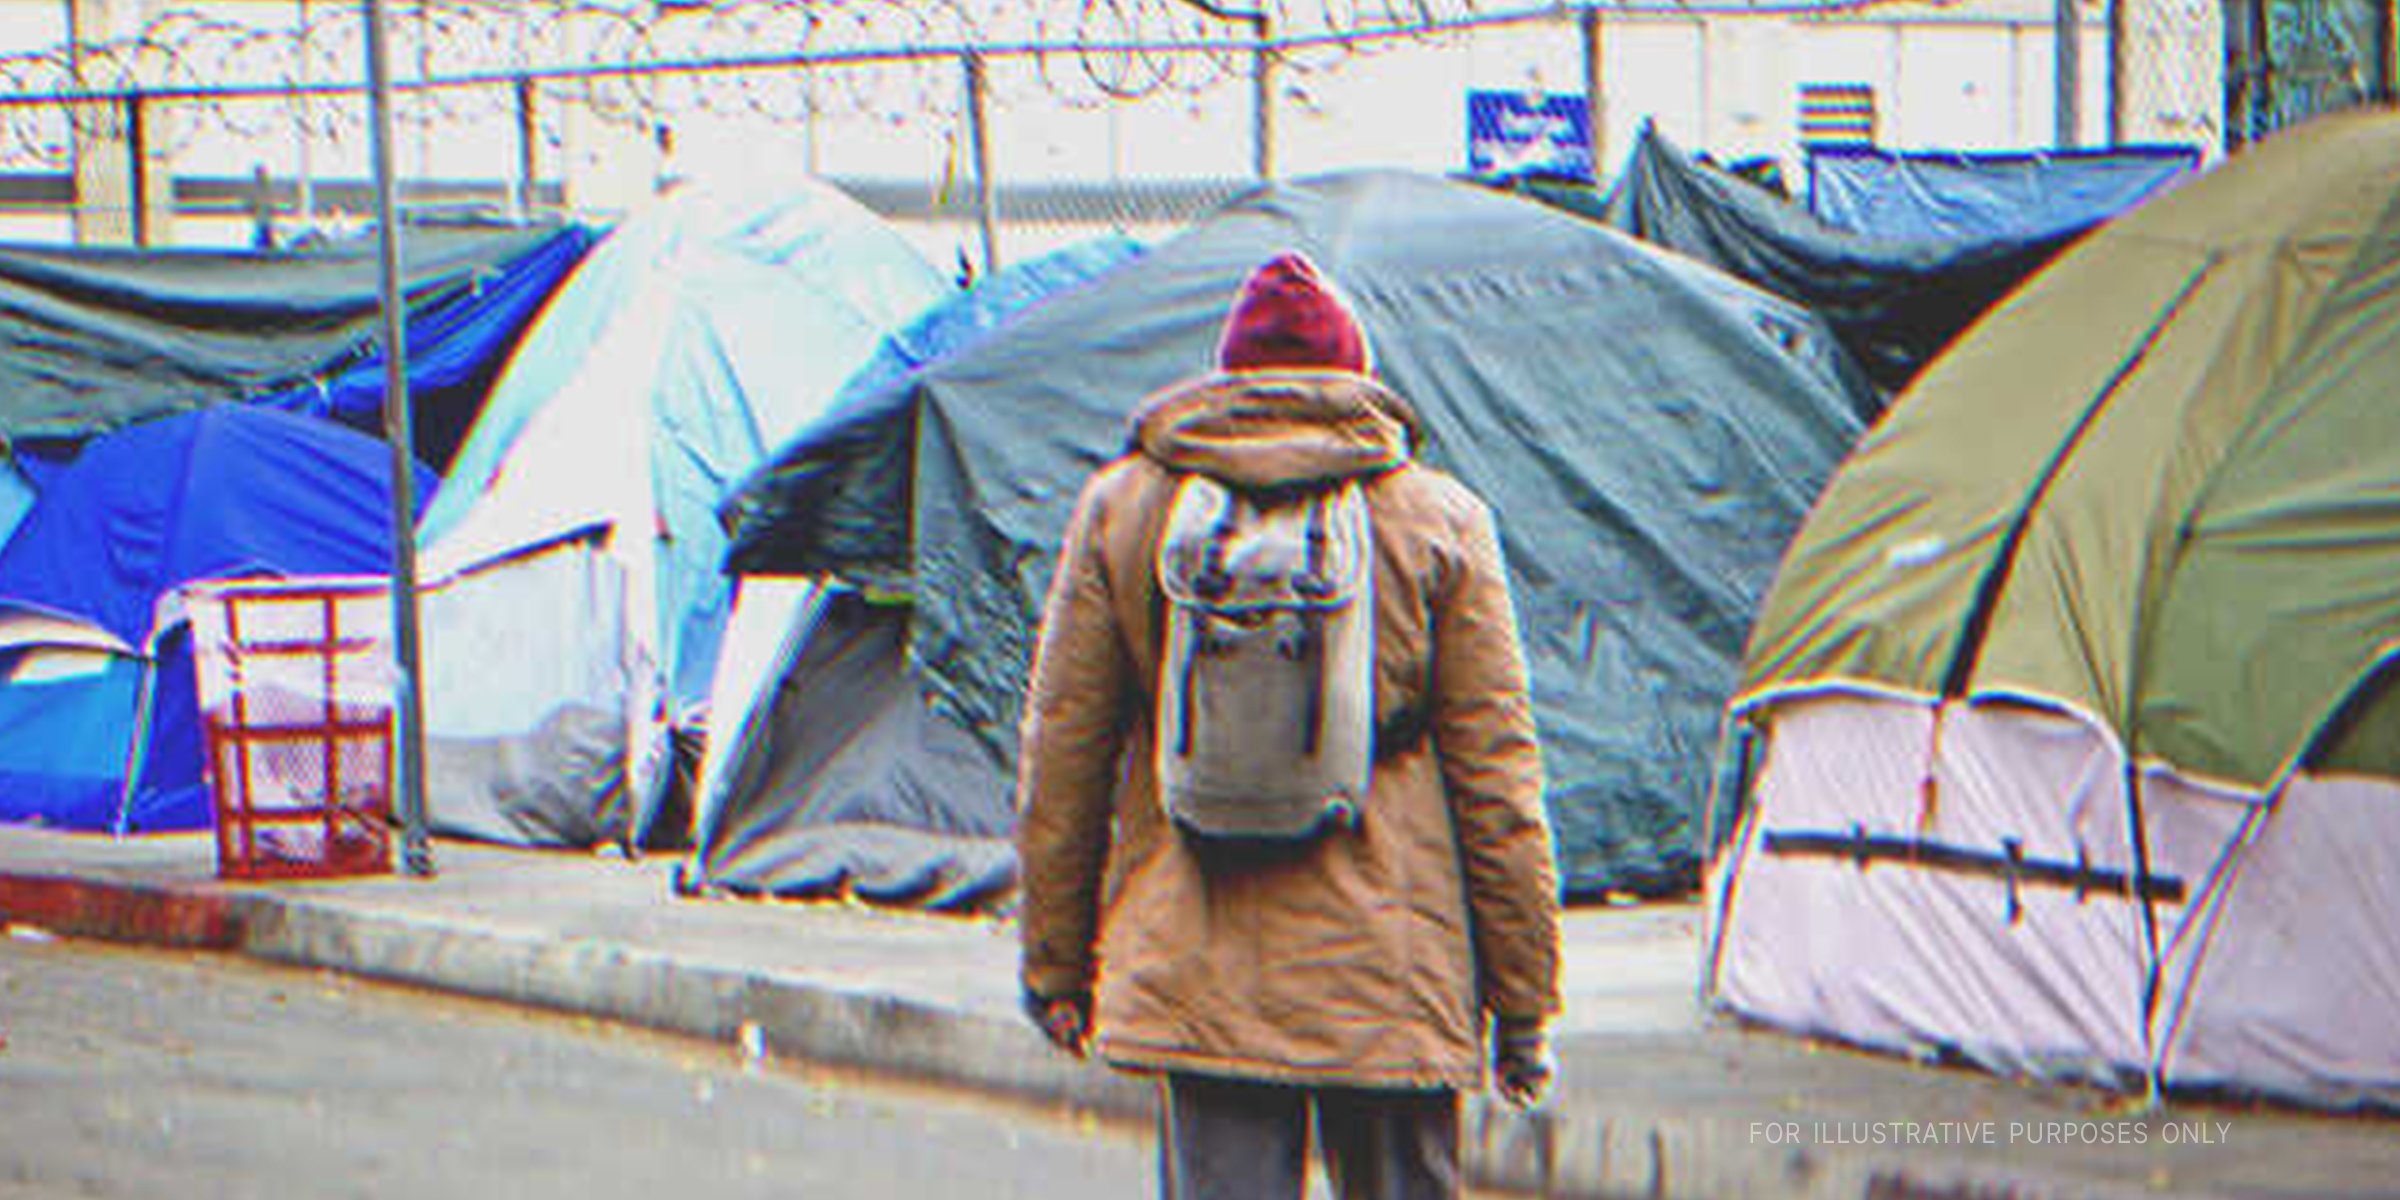 Man in front of tents. | Source: Shutterstock